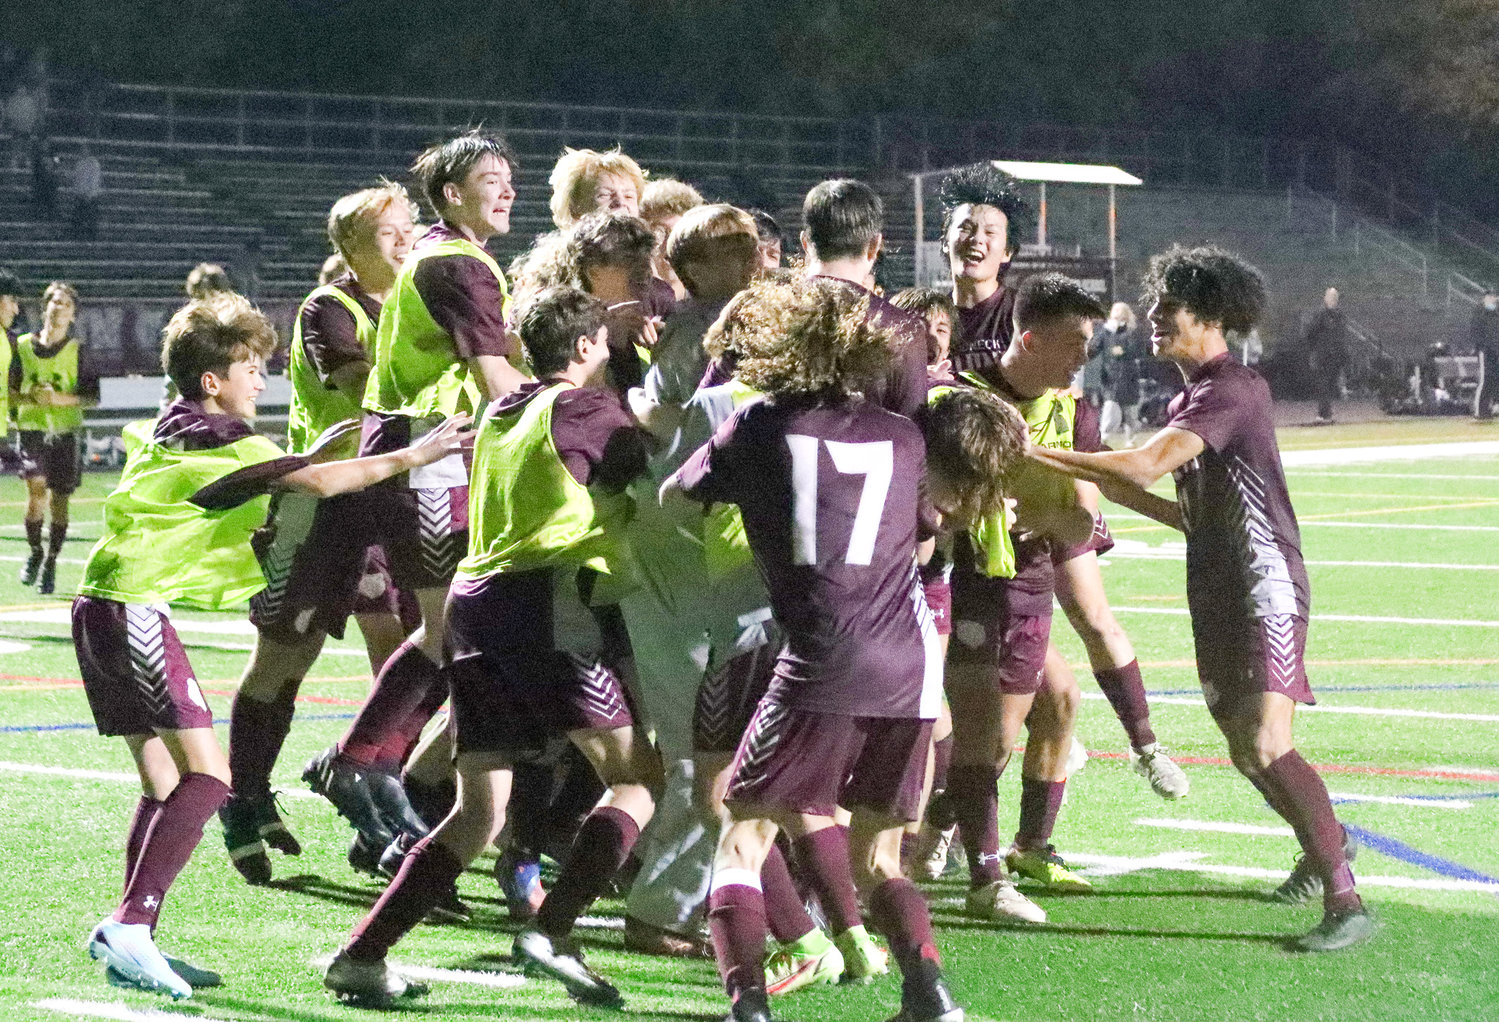 The Bruins celebrated after beating Annapolis 5-4 on October 26.